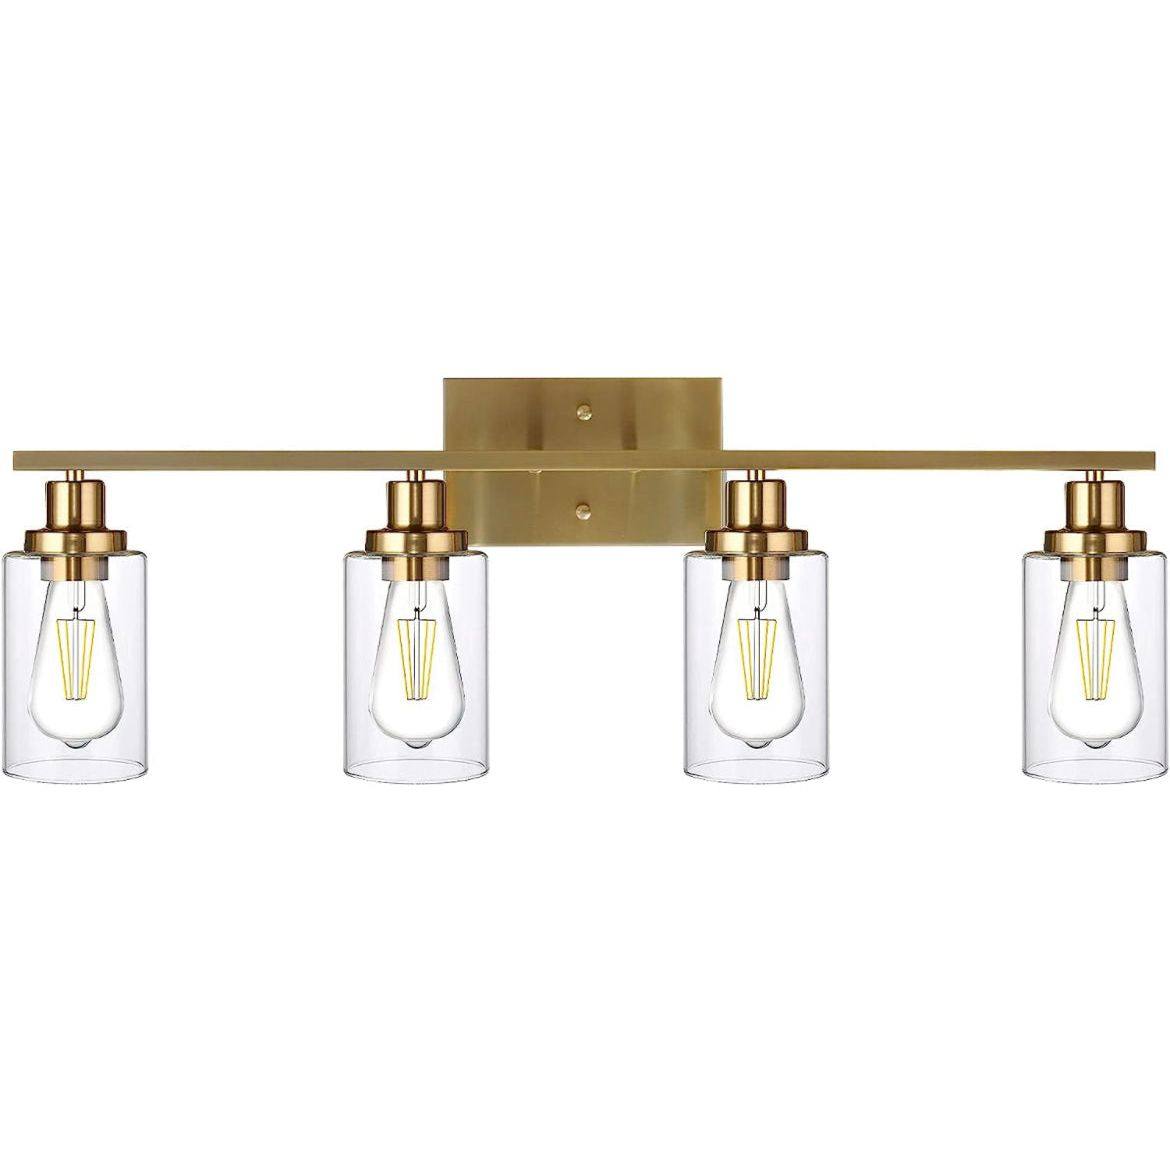 Vanity Lights Fixtures TULUCE 4 Light Bathroom Light Brass Gold Wall Light with Clear Glass Shade, Modern Bathroom Wall Sconce Lighting for Bath, Living Room, Bedroom, Stairs, Gallery, Restaurant - Selzalot